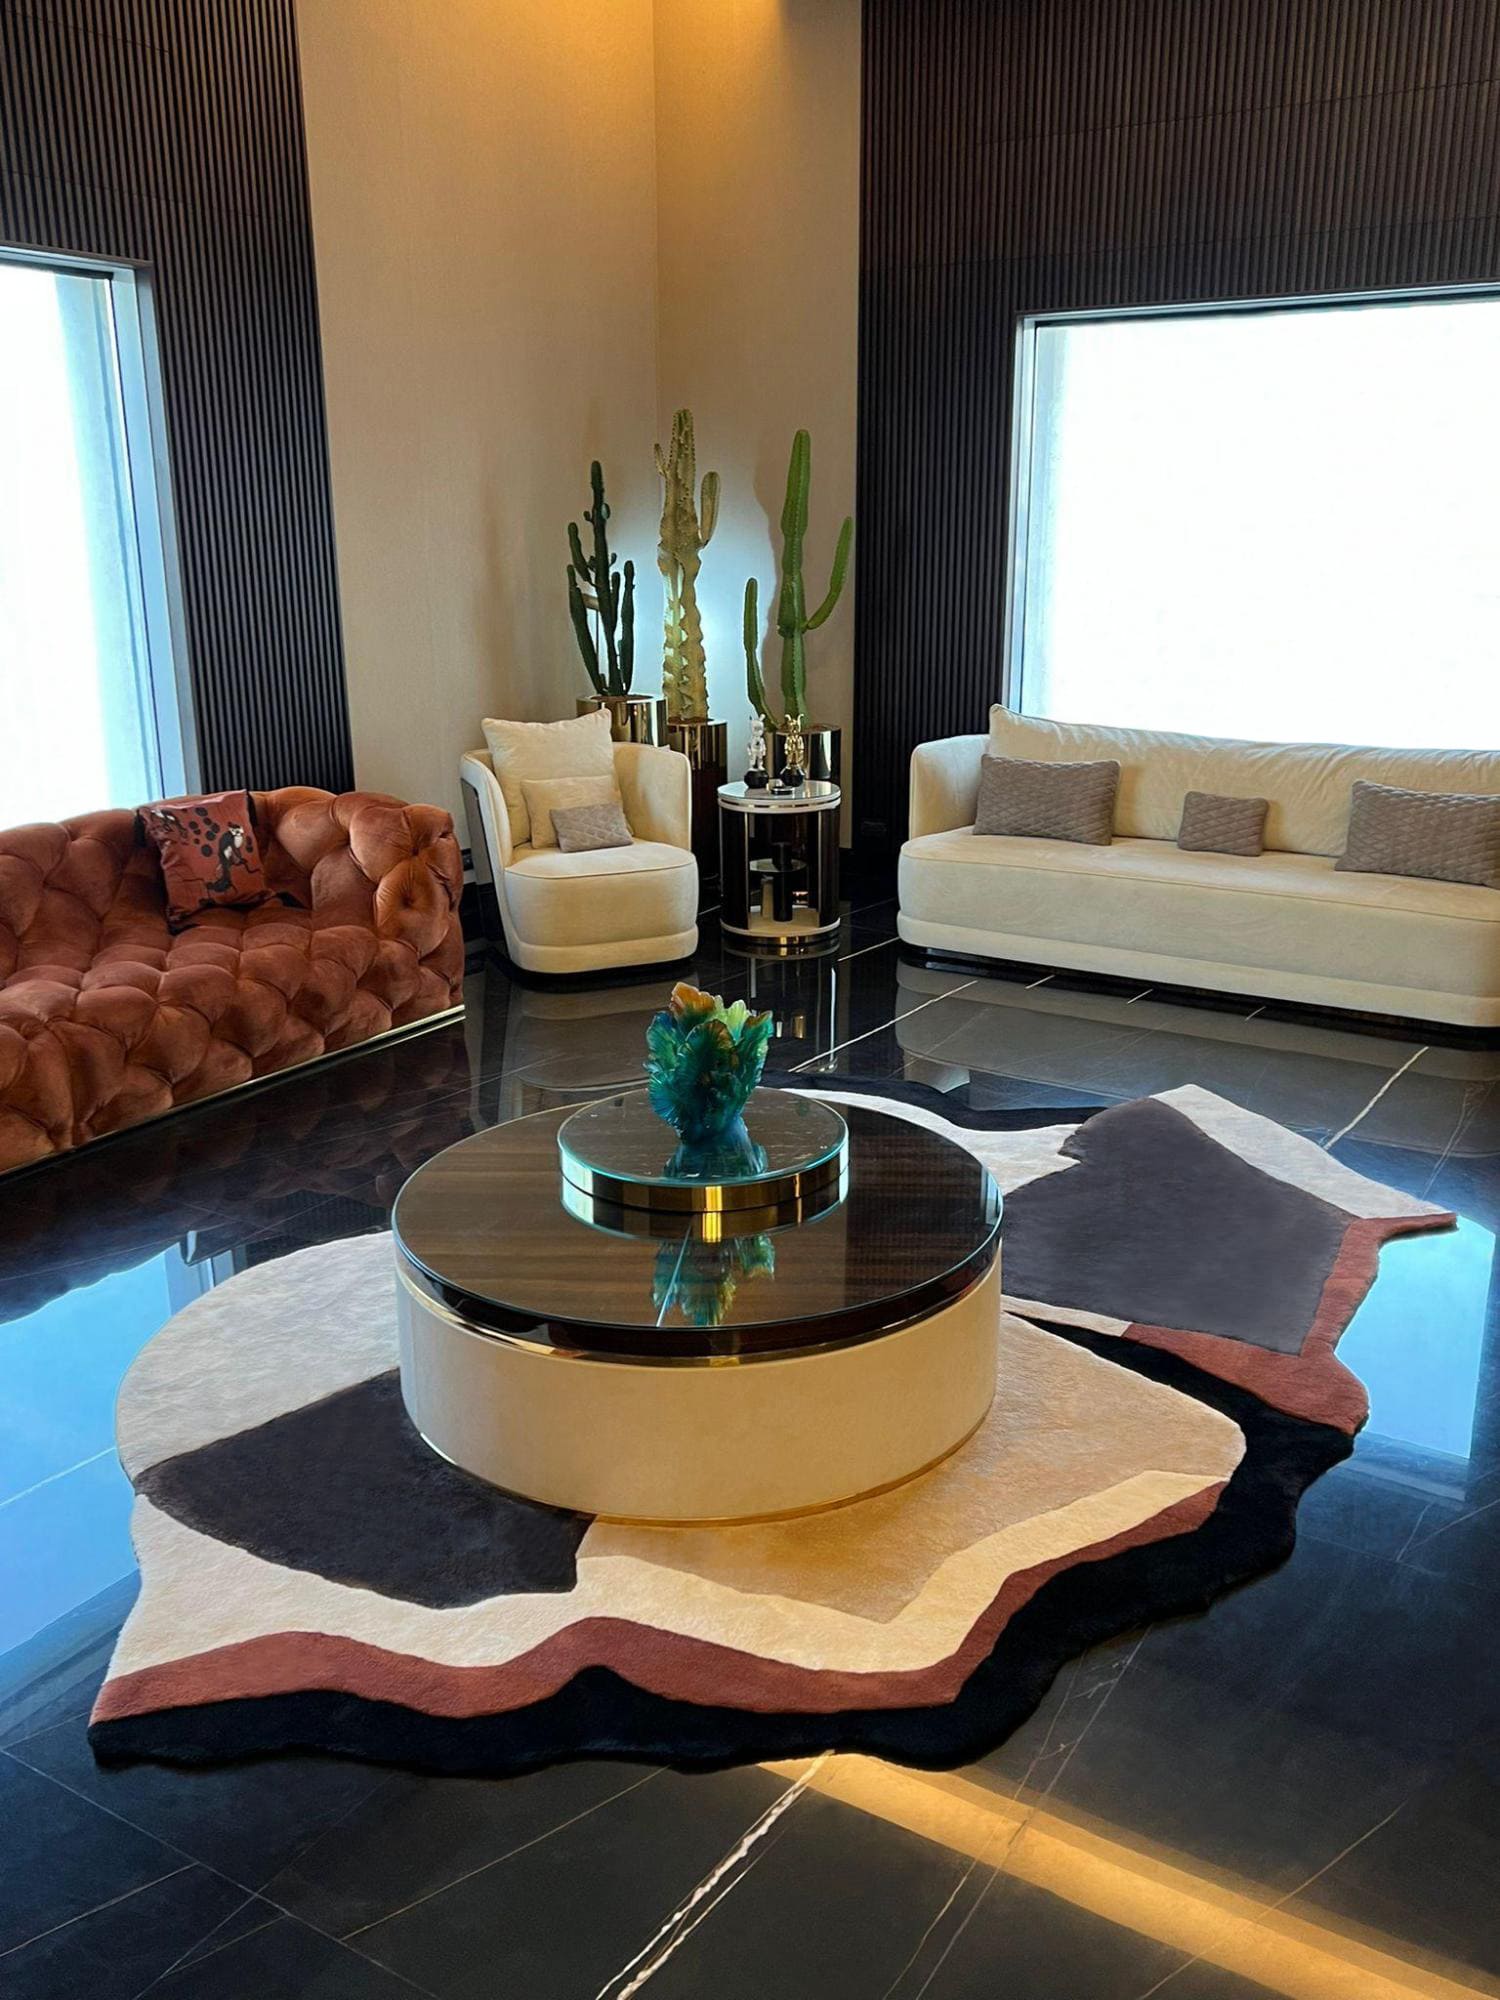 homey and marvelous villa in kuwait, kuwait project. private client fatemah alshuraian, cocoon suspension, piano rug, cher suspension, custom wallpaper, ach collection pillow